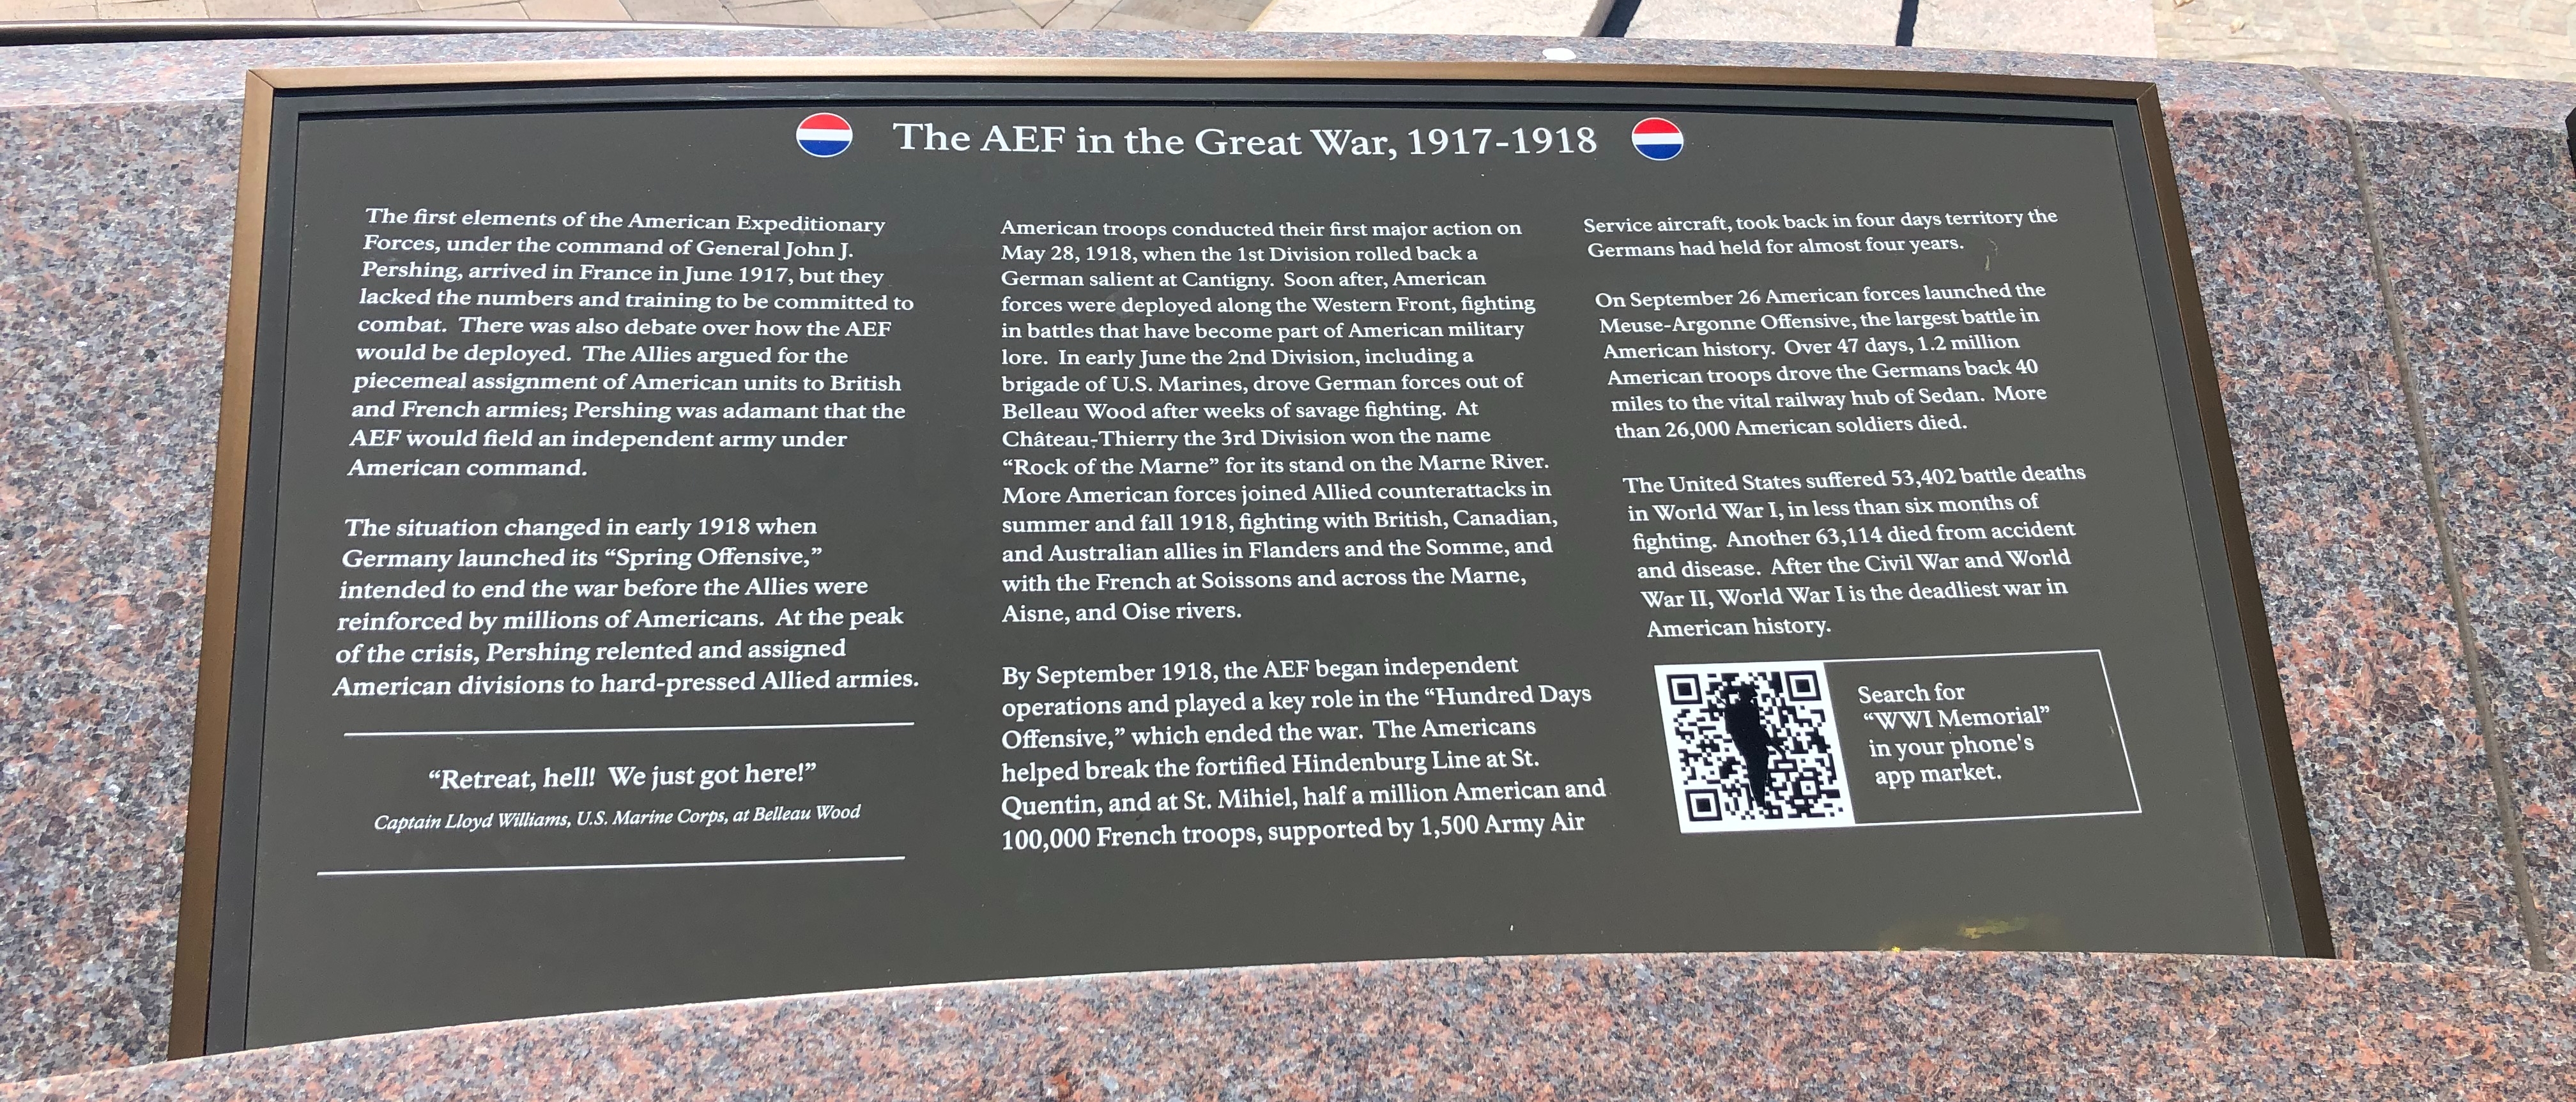 The AEF in the Great War, 1917-1918 Marker